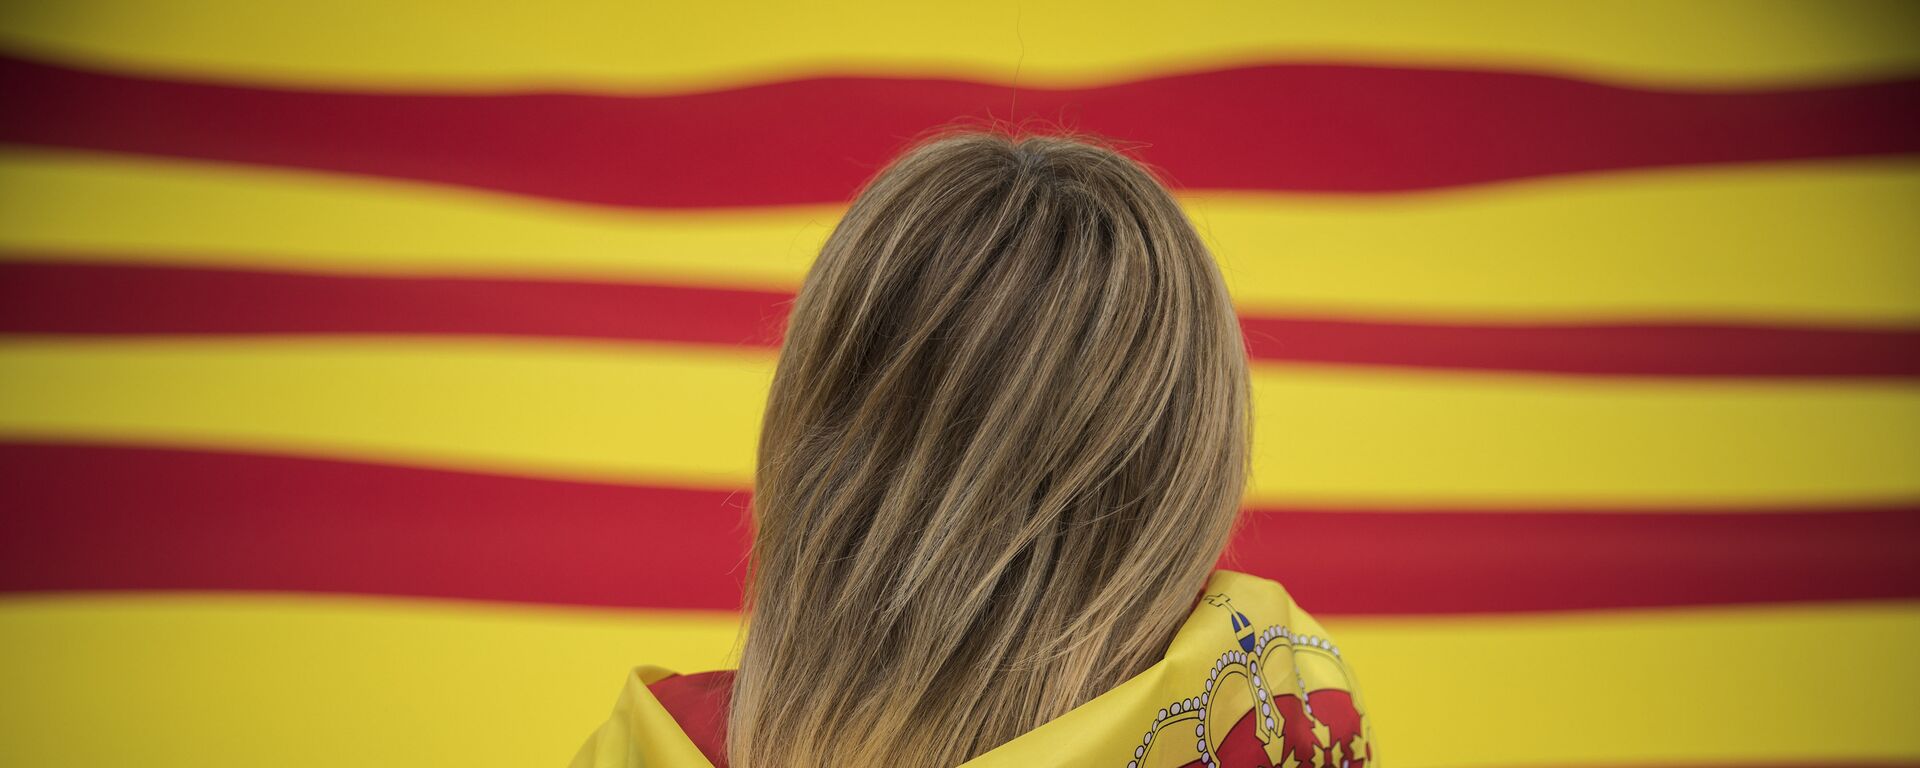 A woman wearing a Spanish flag on her shoulders looks at a giant flag of Catalonia as people celebrate a holiday known as Dia de la Hispanidad or Spain's National Day in Barcelona, Spain, Thursday, Oct. 12, 2017.  - Sputnik International, 1920, 02.02.2023